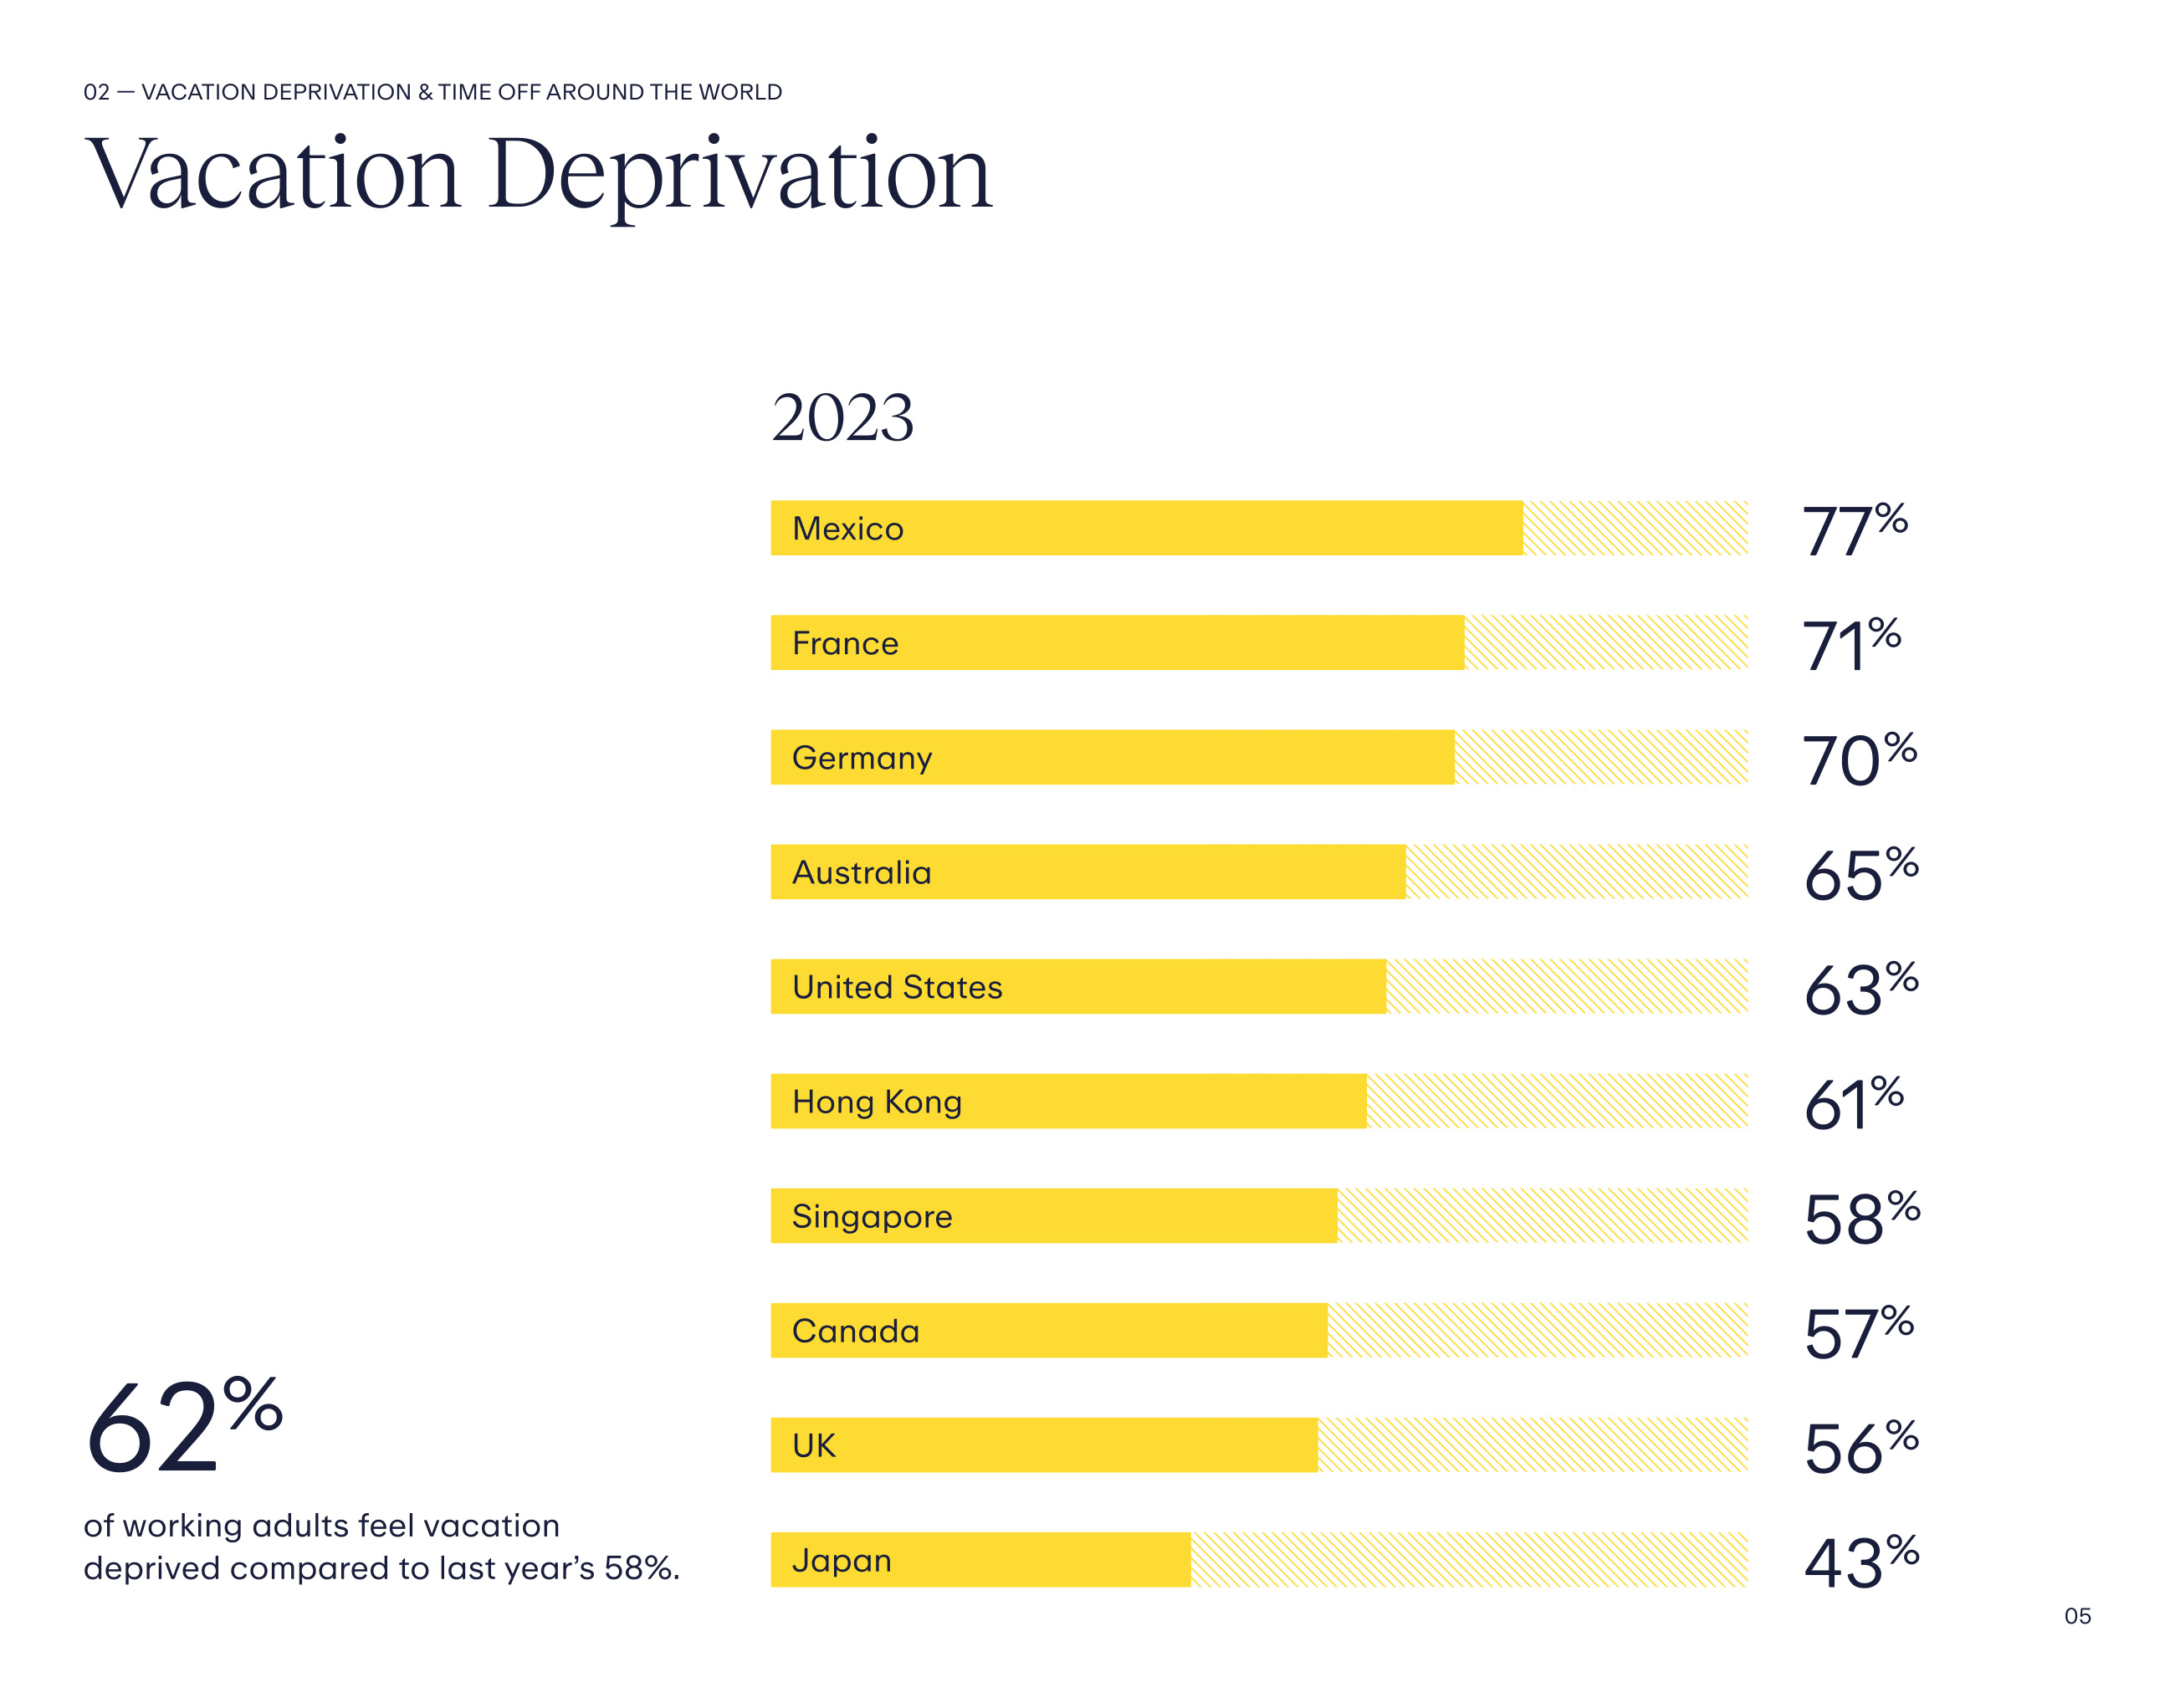 Vacation Deprivation by country